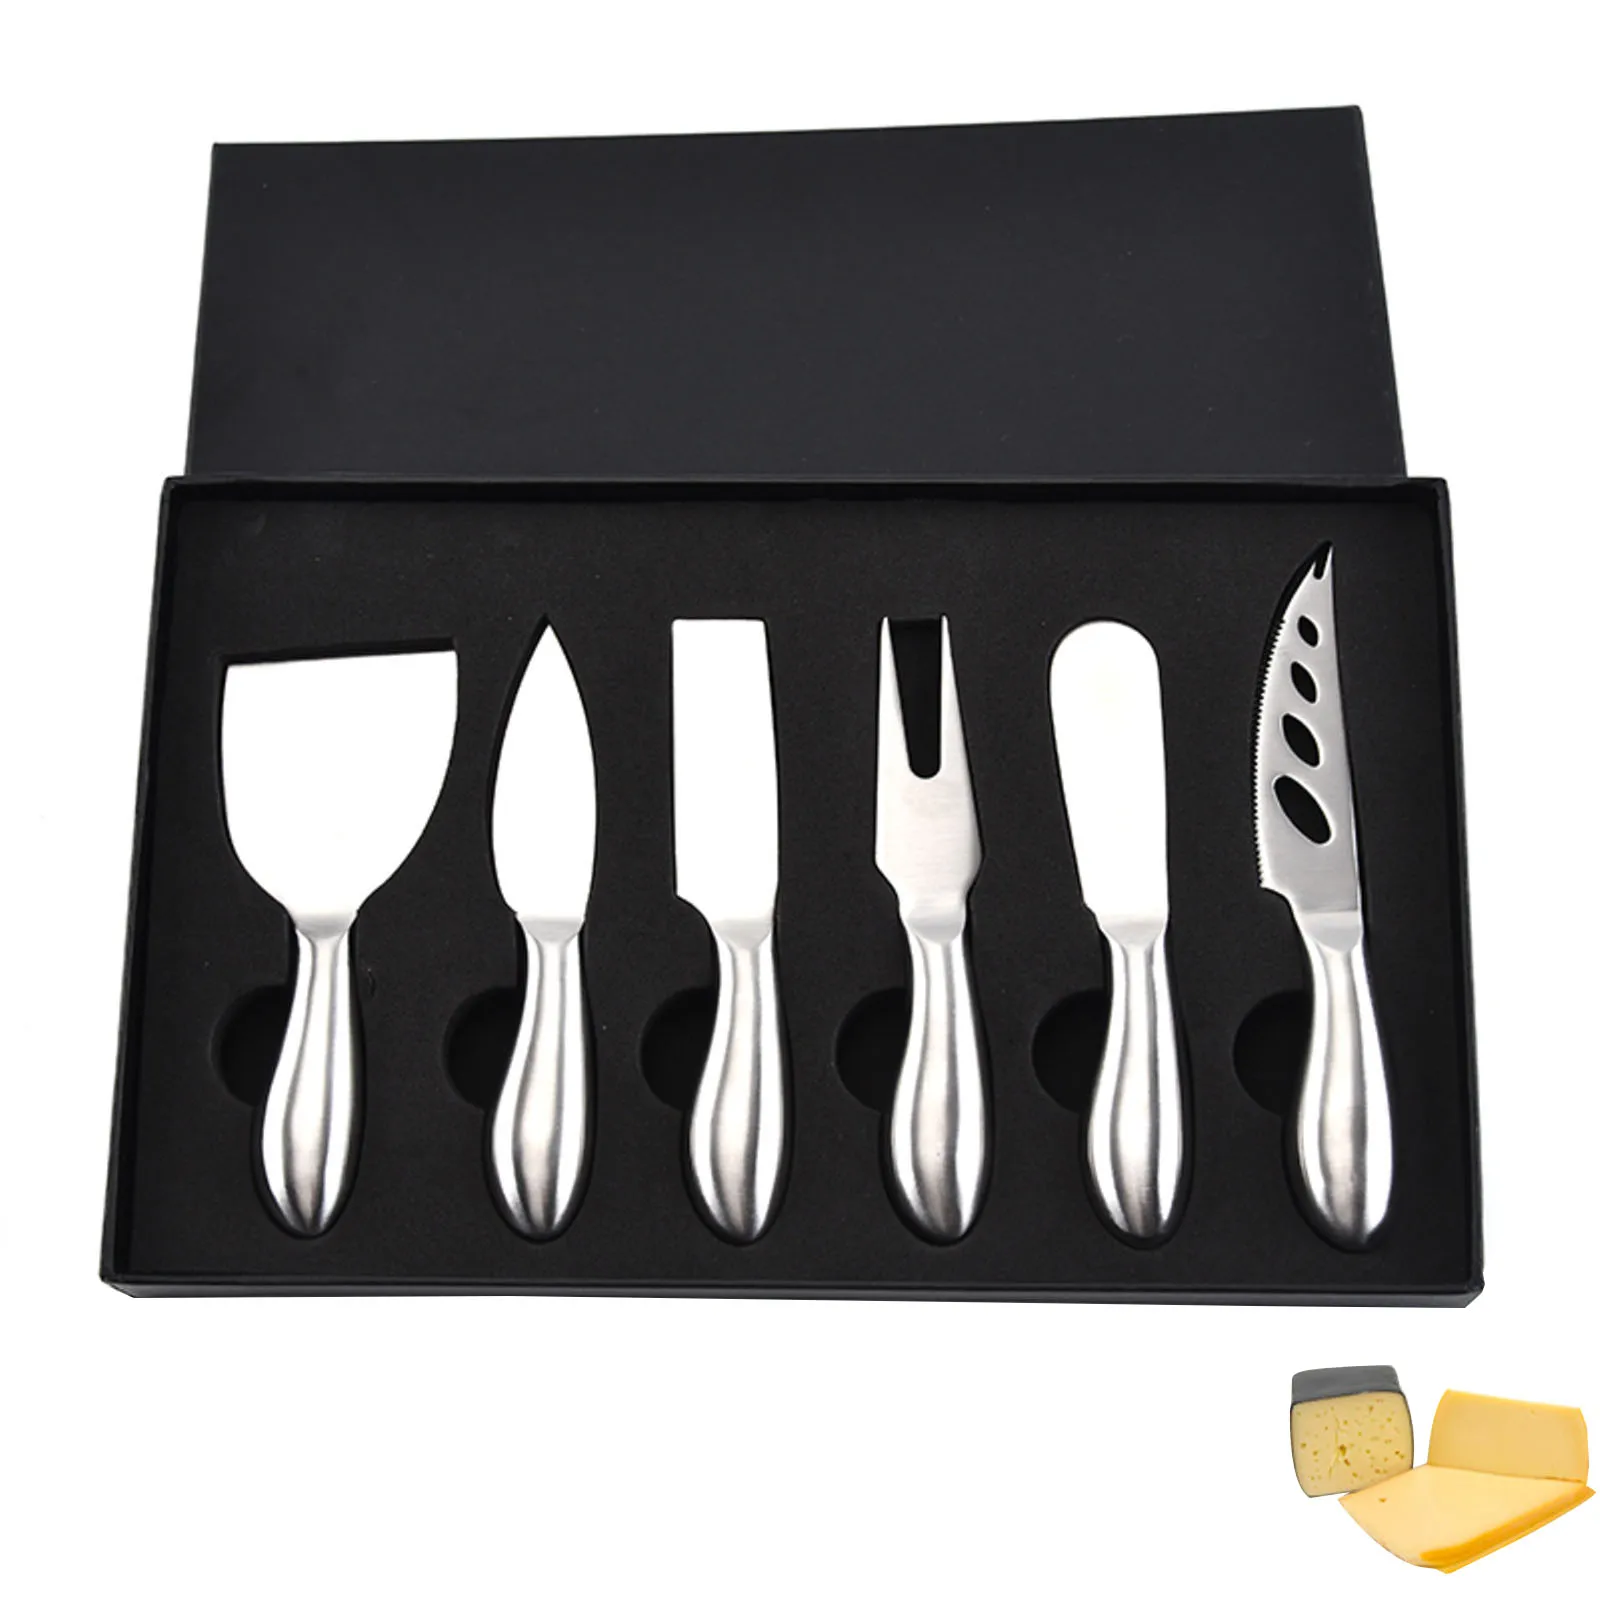 

6pcs Butter Cheese Dessert Knife Stainless Steel Jam Cutlery Toast Wipe Cream Bread Knifes Cheese Cutter Kitchen Tool Accessorie